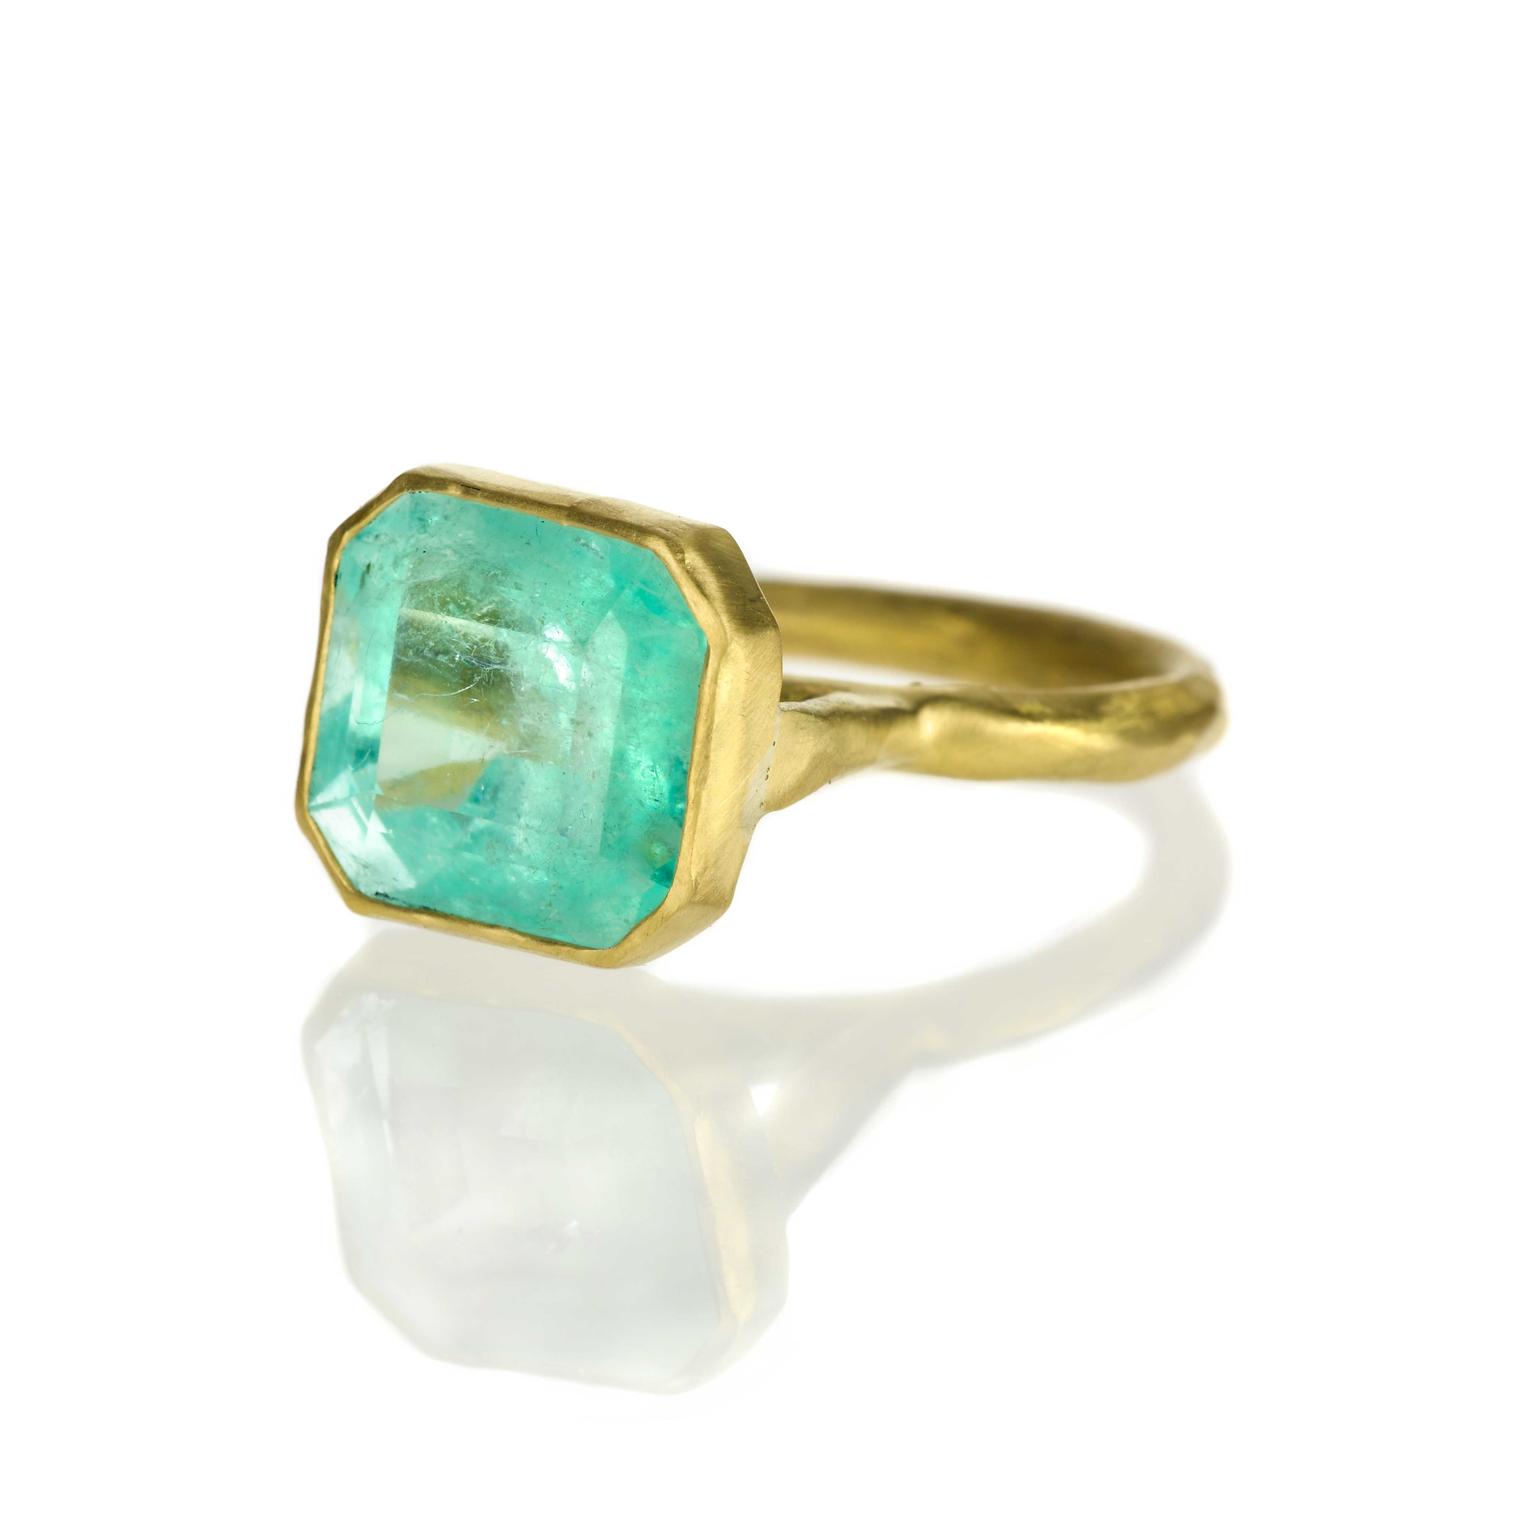 Rubover-settings Margery Hirschey Emerald ring